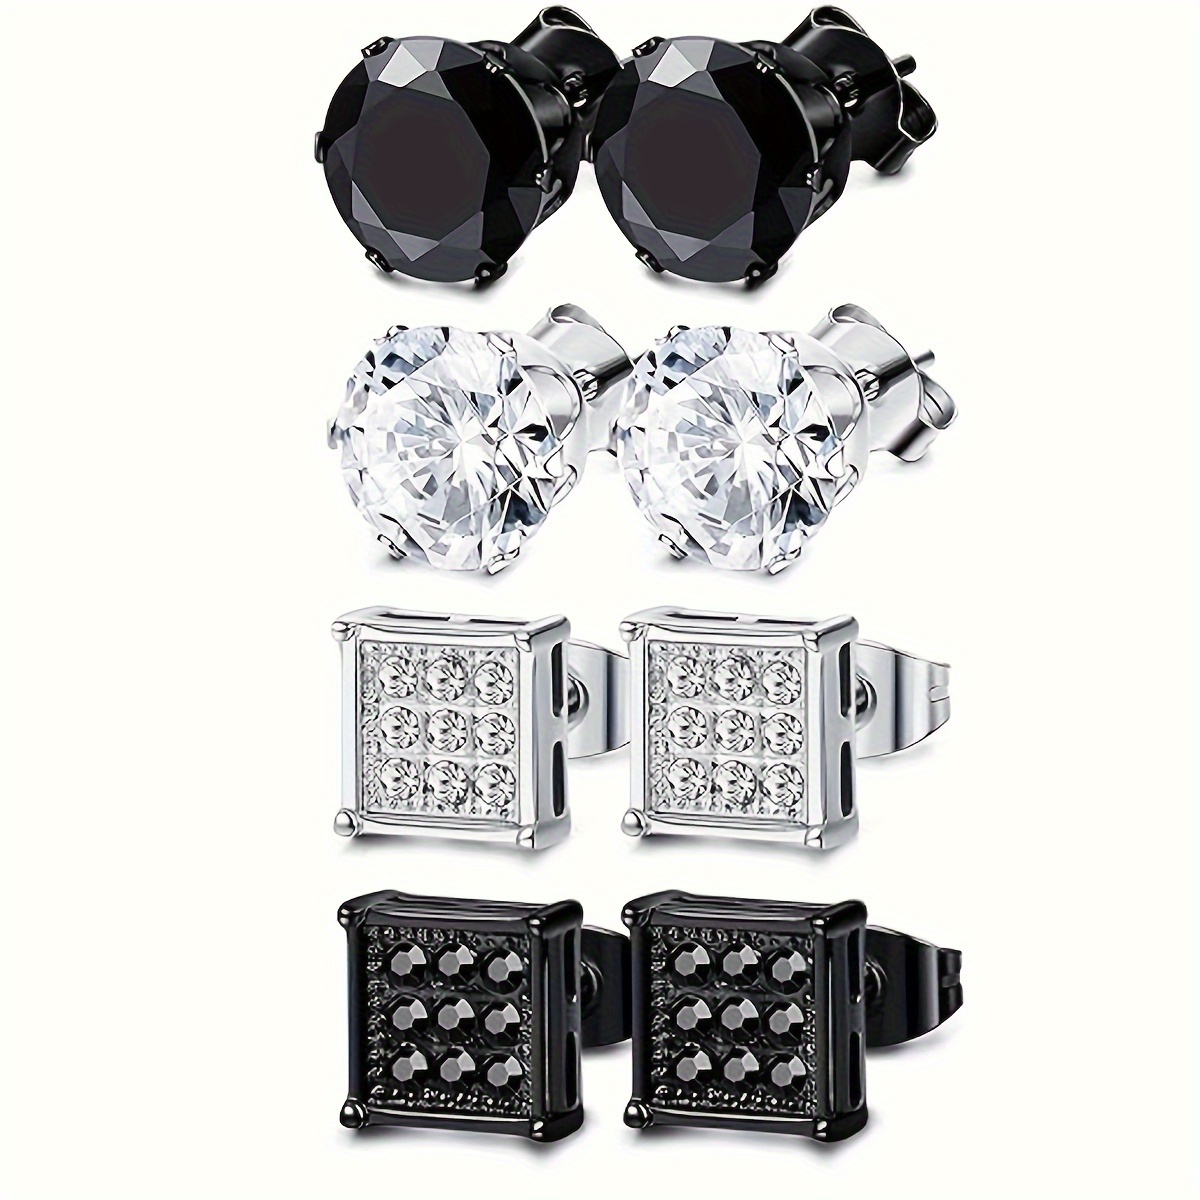 Squared Cubic Zirconia Ear Studs for Men - Pair 6mm